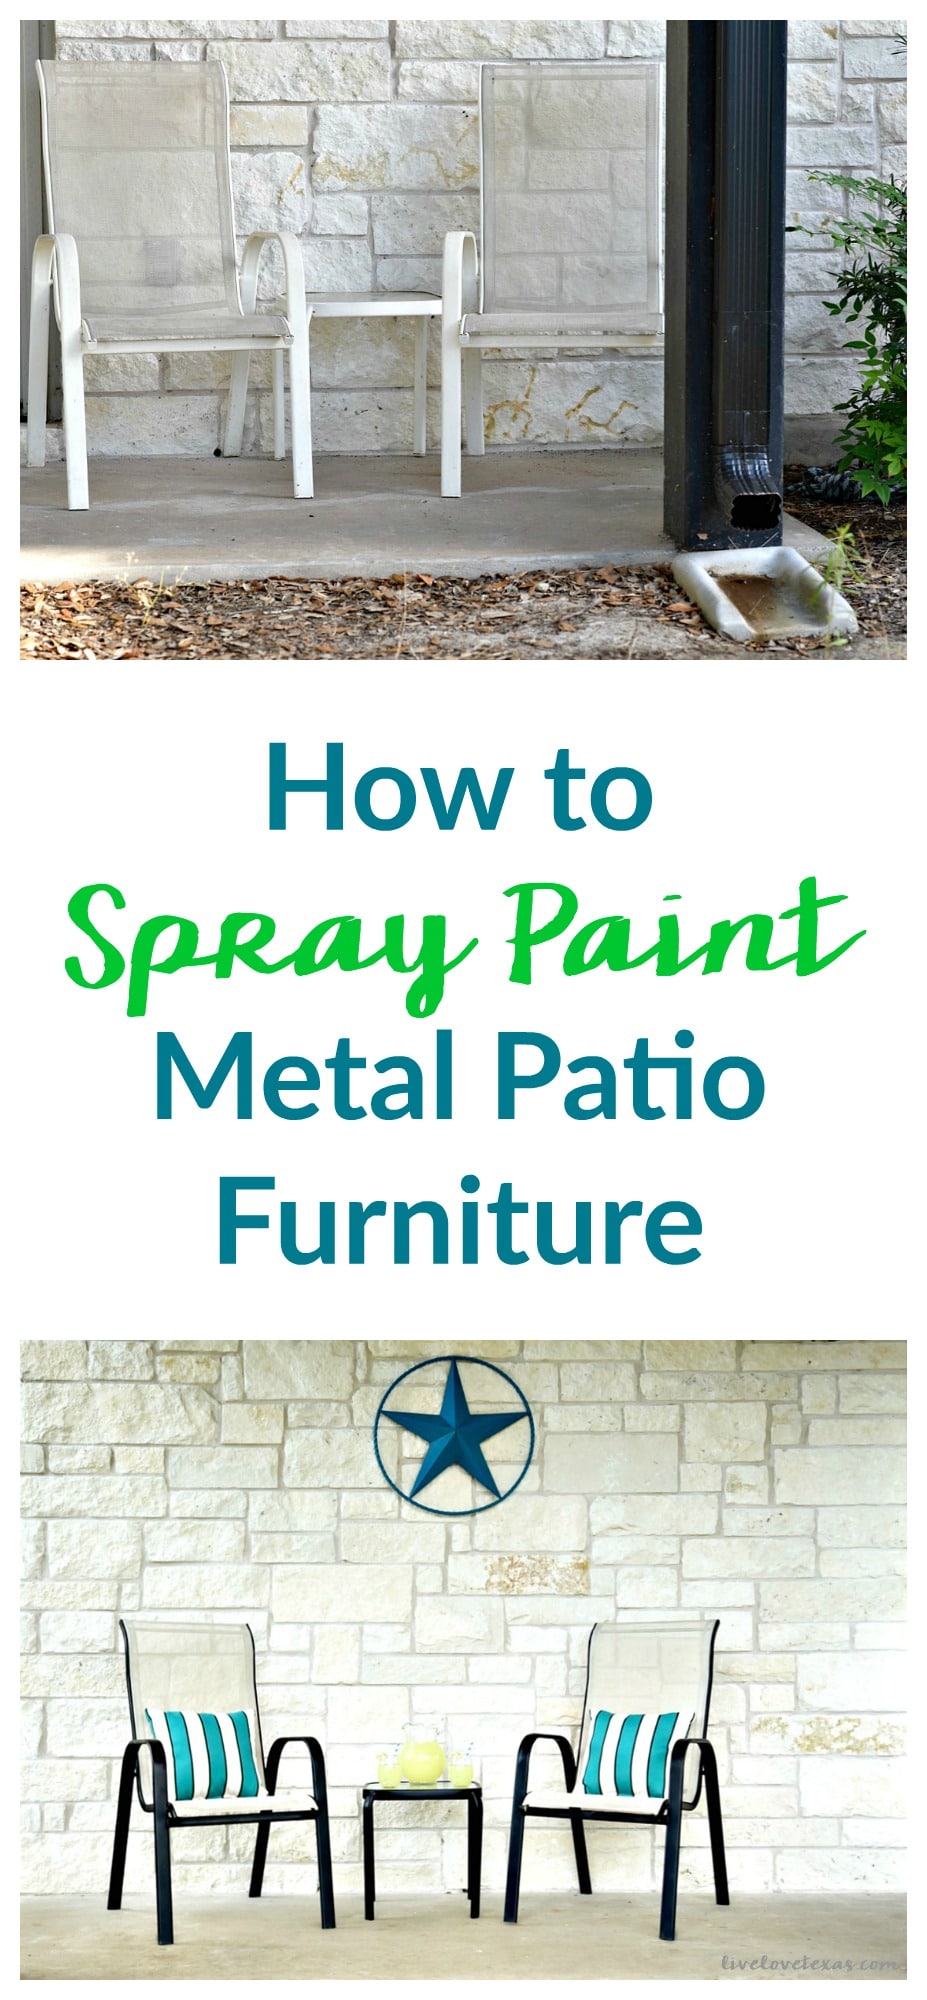 How to Spray Paint Metal Patio Furniture